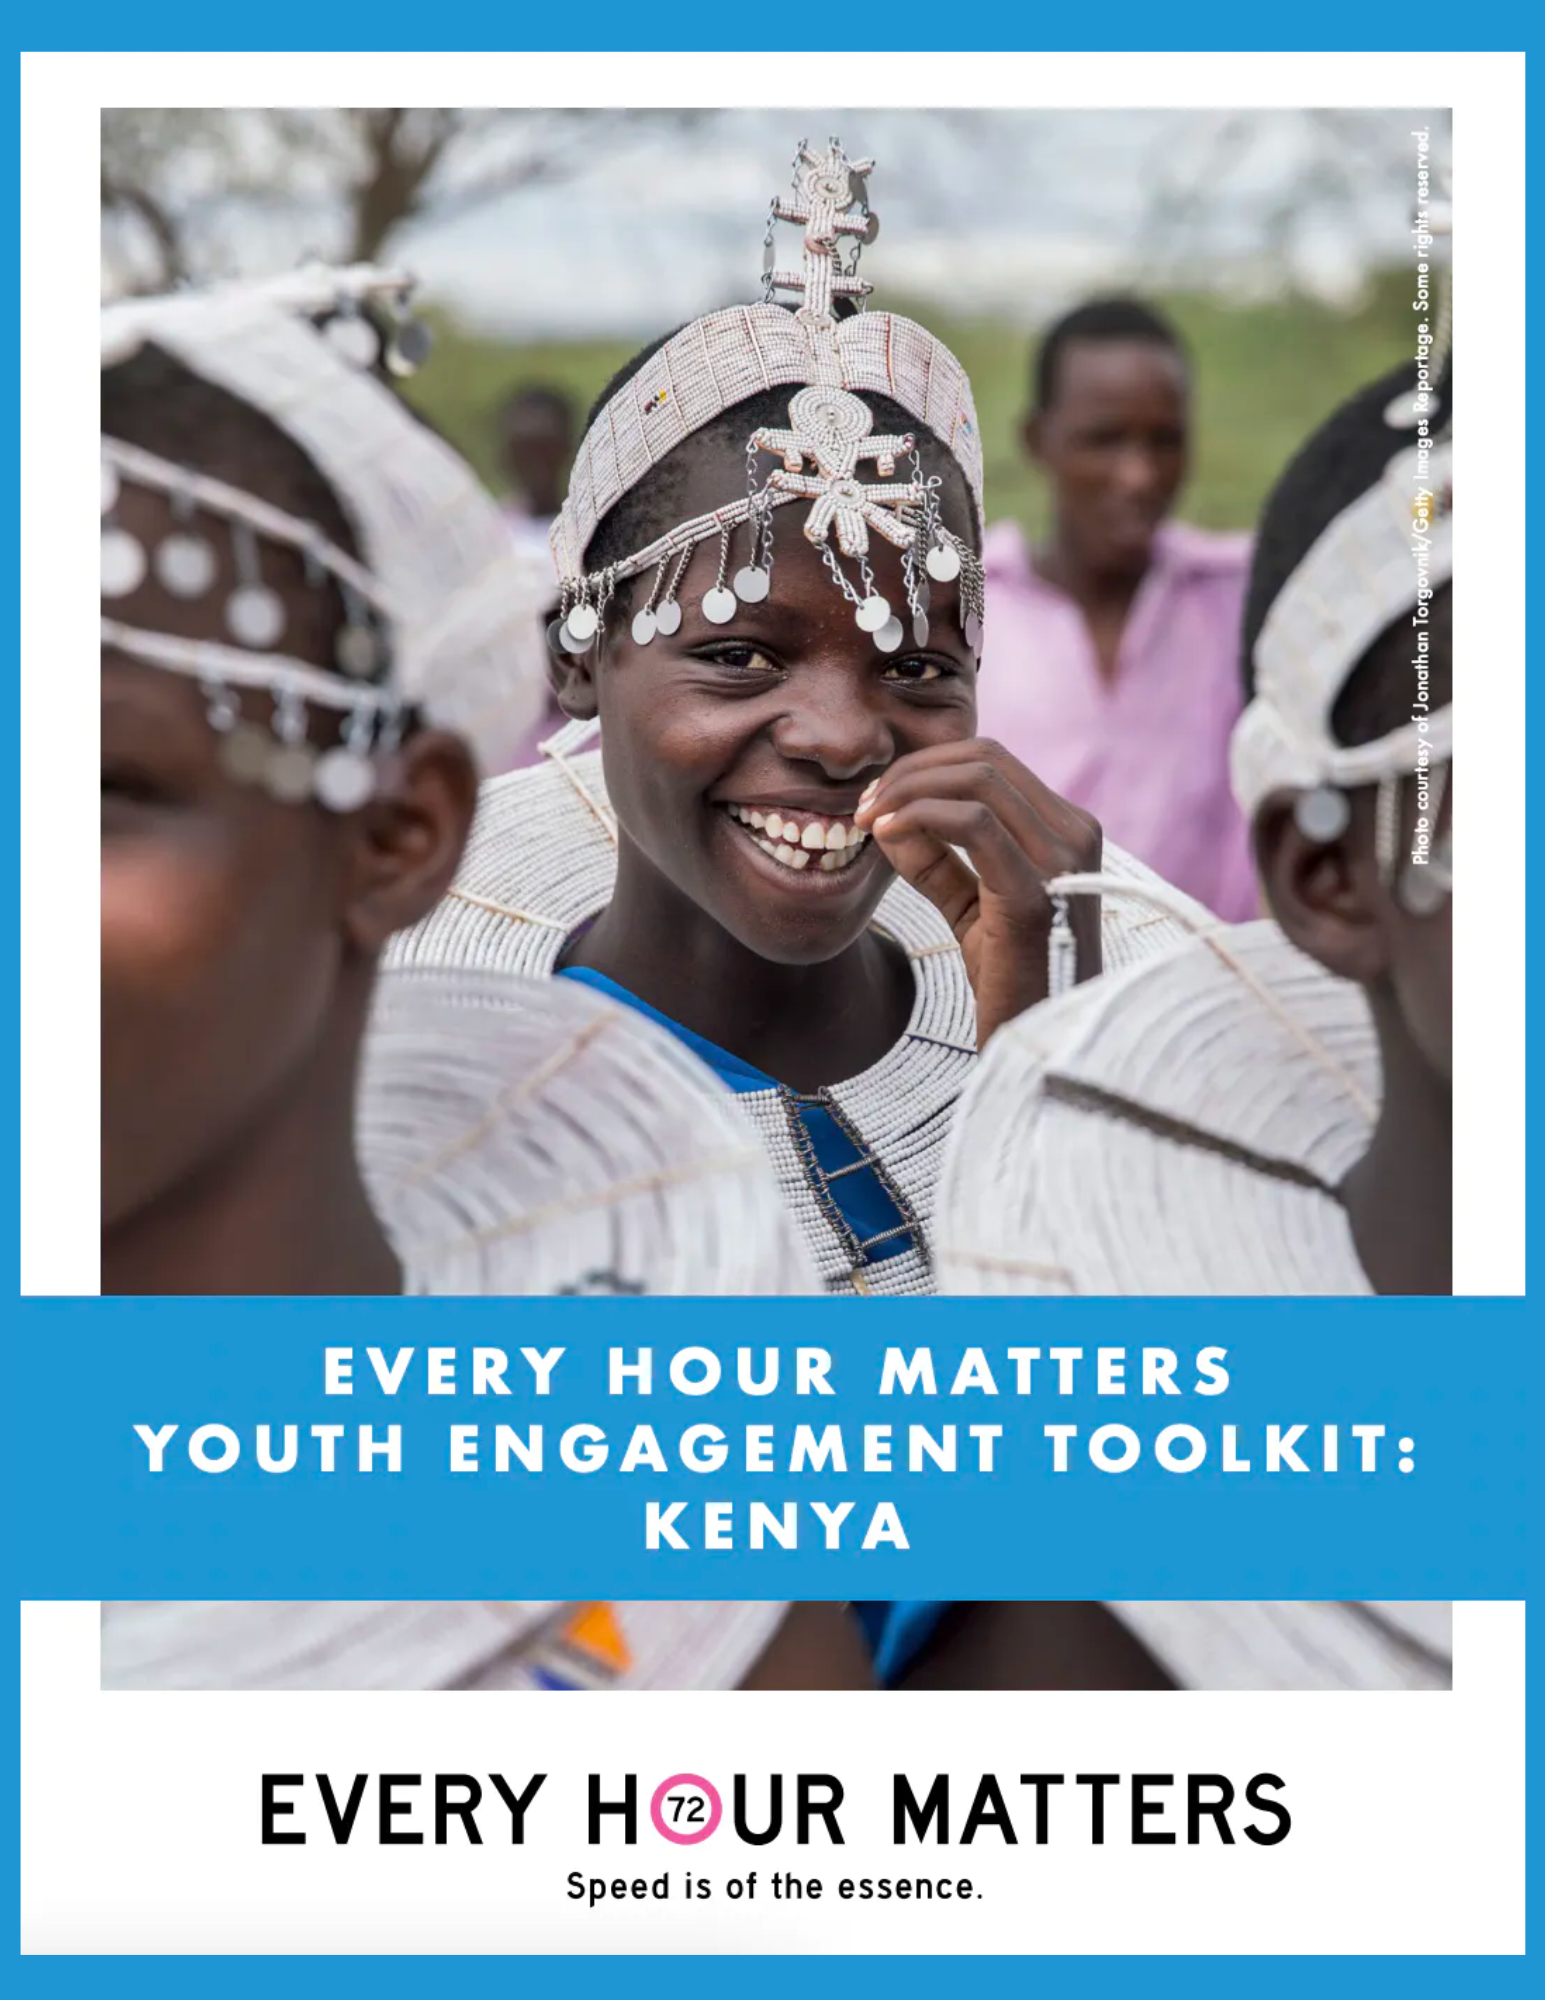 Every hour matters youth engagement toolkit Kenya